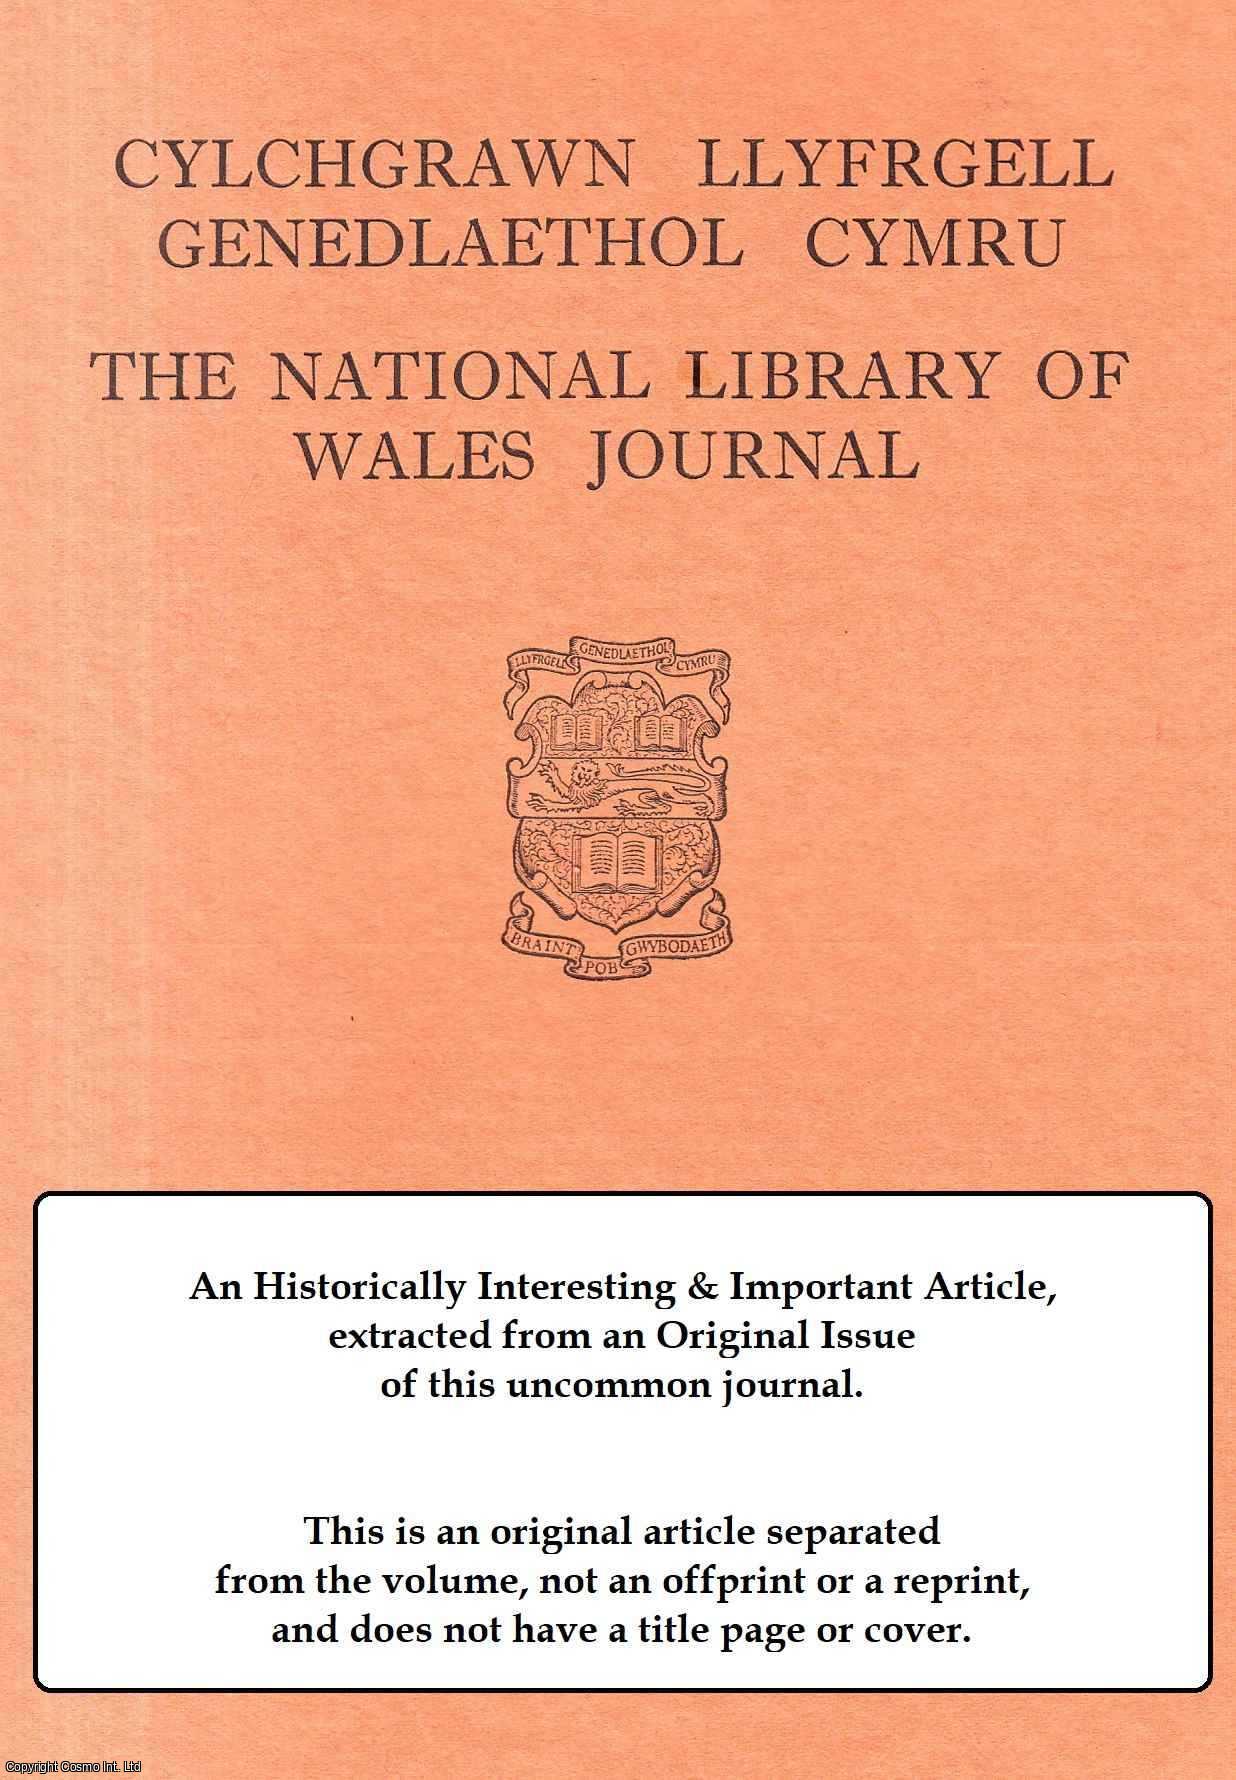 E. D. Jones - The Ottley Papers. An original article from The National Library of Wales Journal, 1945.